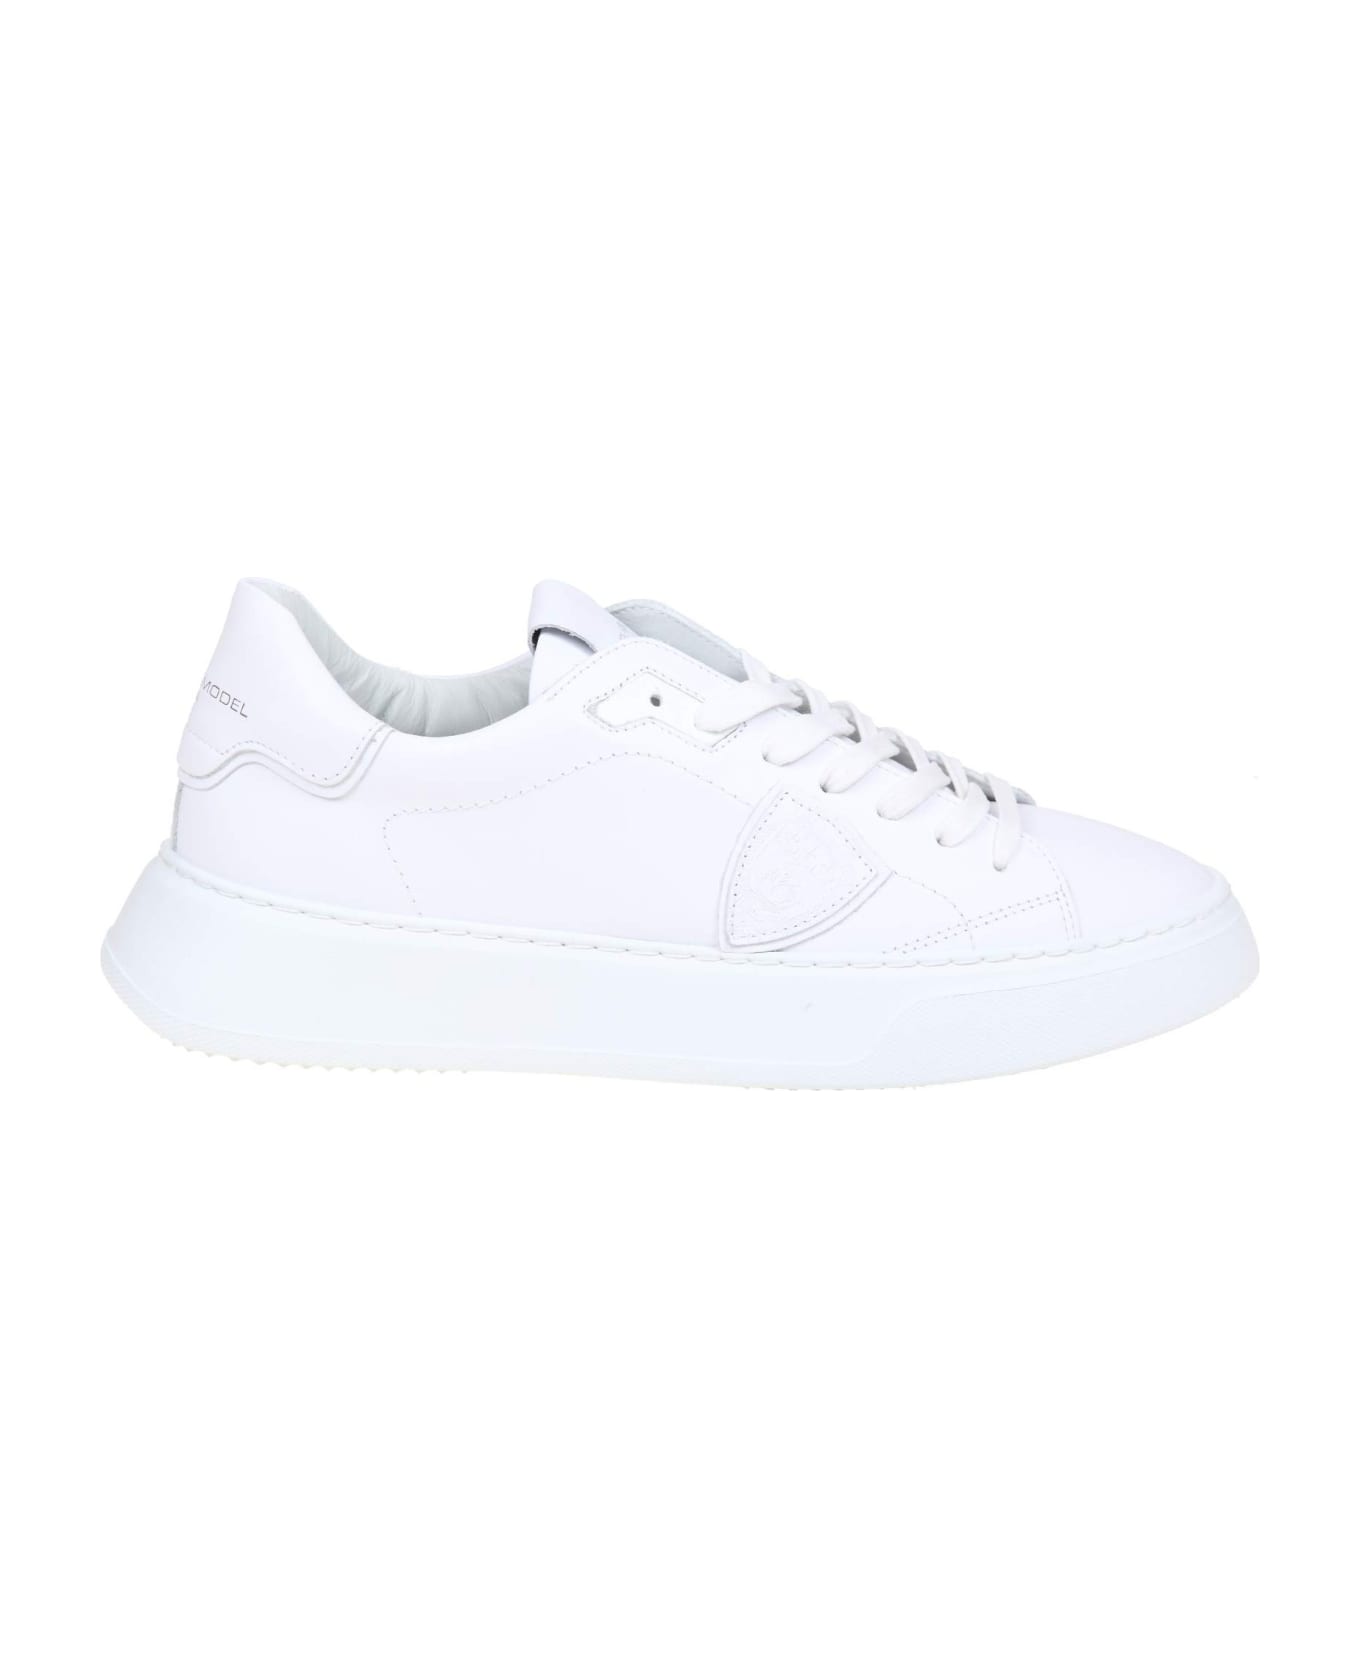 Philippe Model Temple Sneakers In White Leather - WHITE